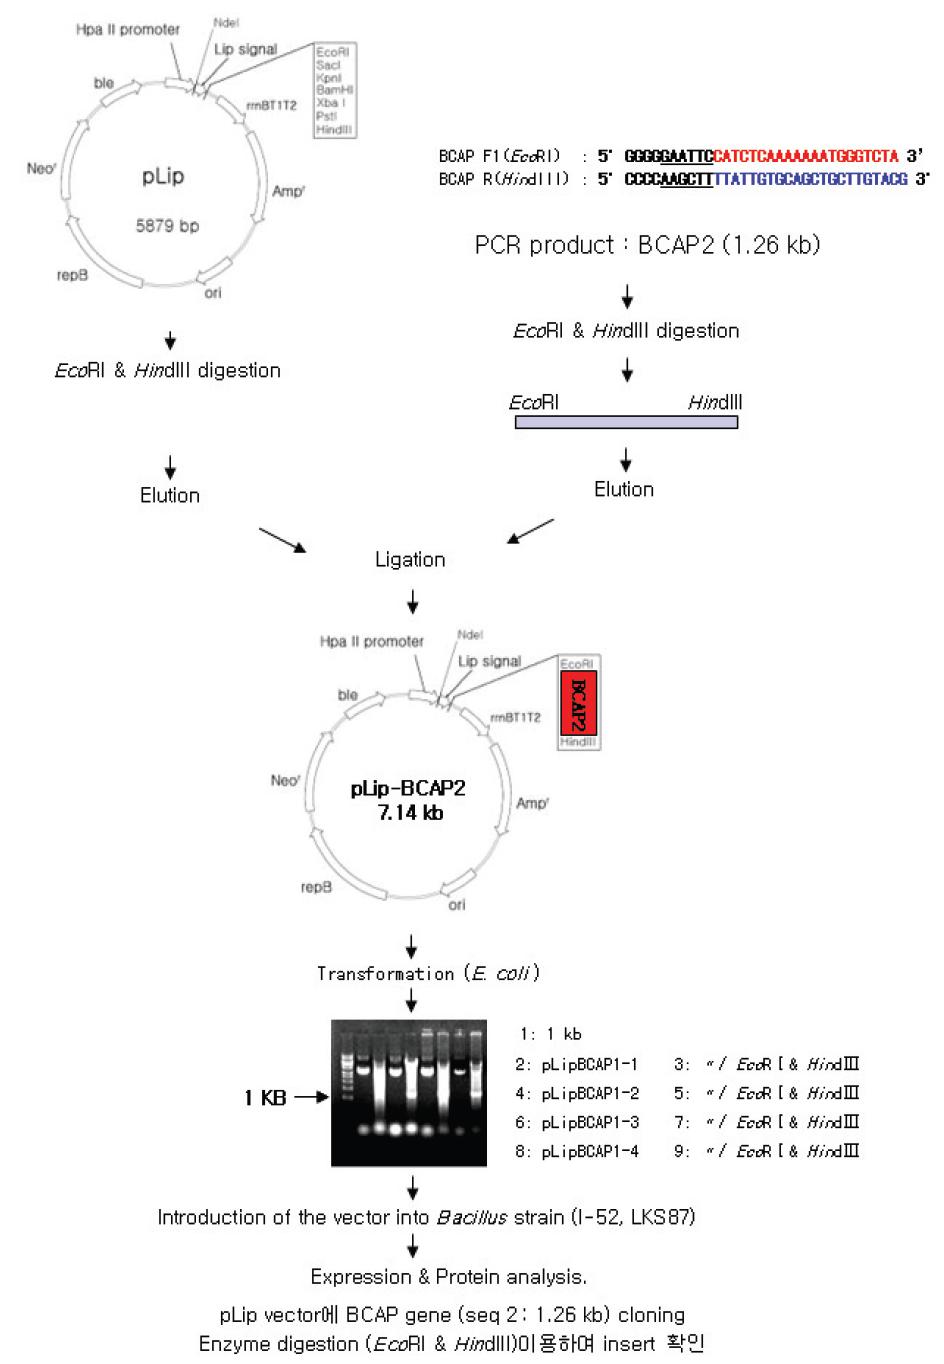 Cloning Strategy of the BCAP2 gene into conventional Bacillus vector, pLip.